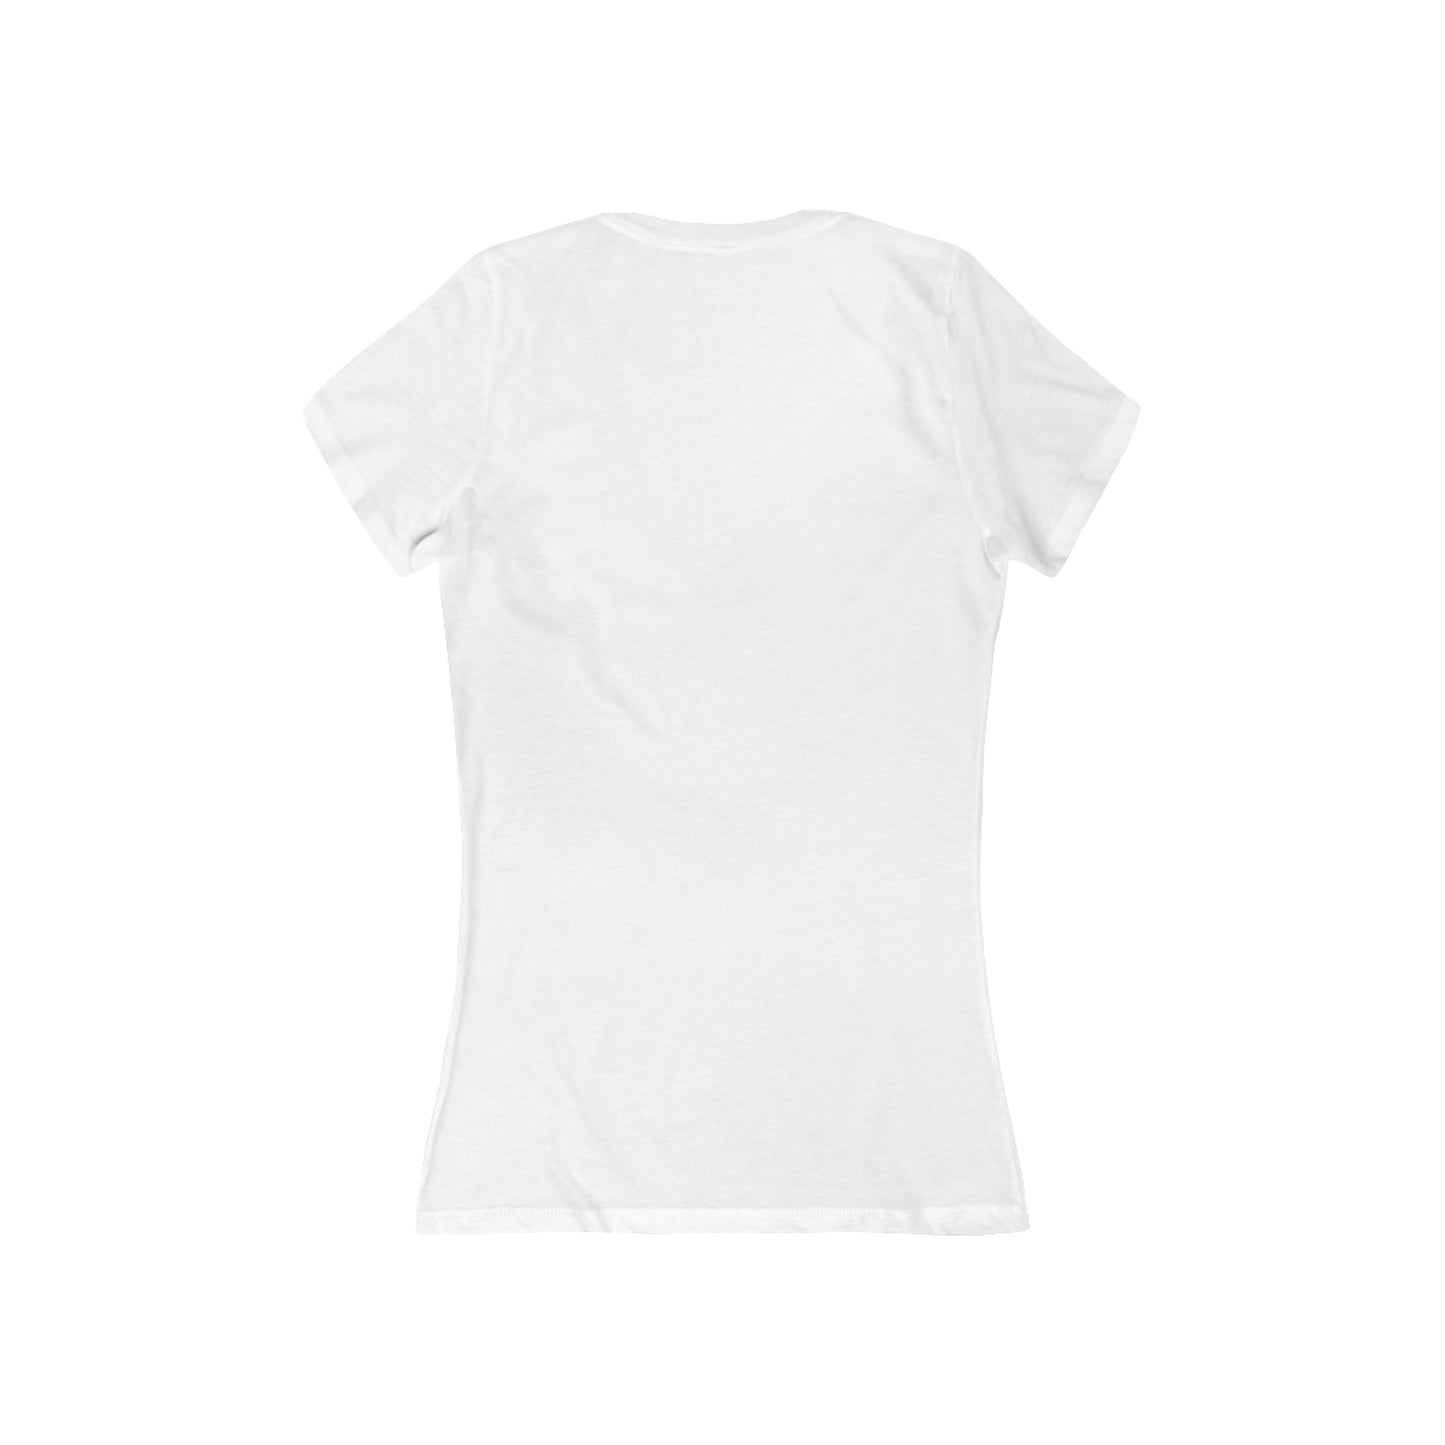 With gray hair comes gray responsibility, short sleeve deep v-neck t-shirt, for women embracing silver and gray hair